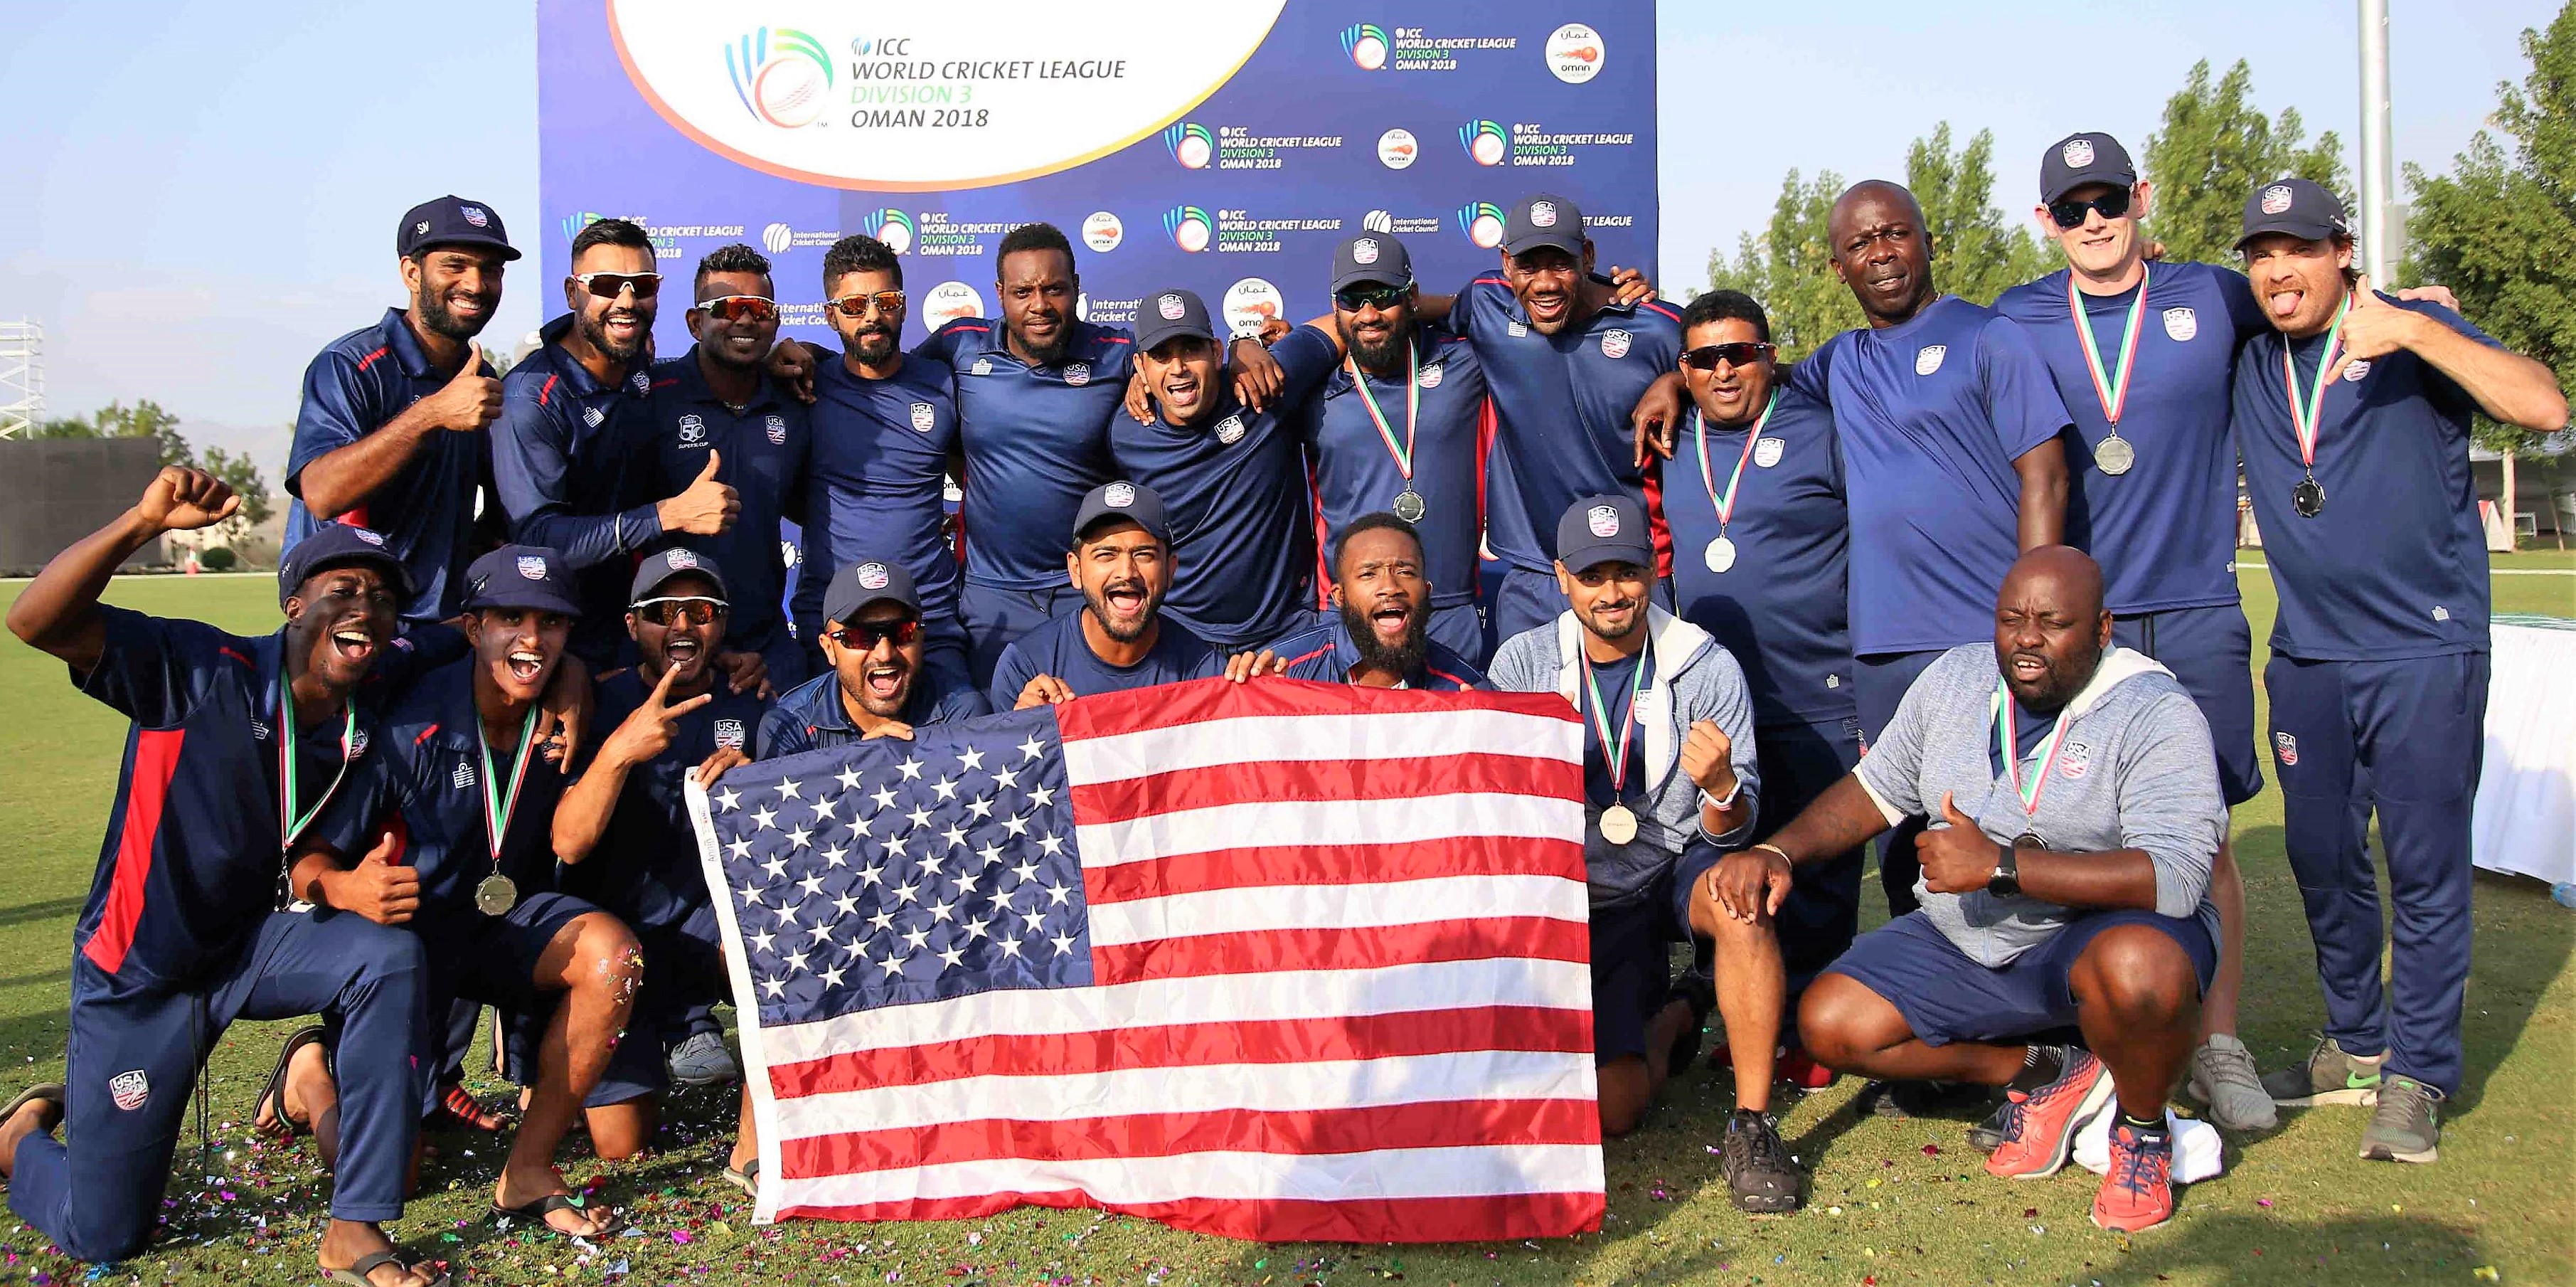 USA Cricket Approved as ICC’s 105th Member